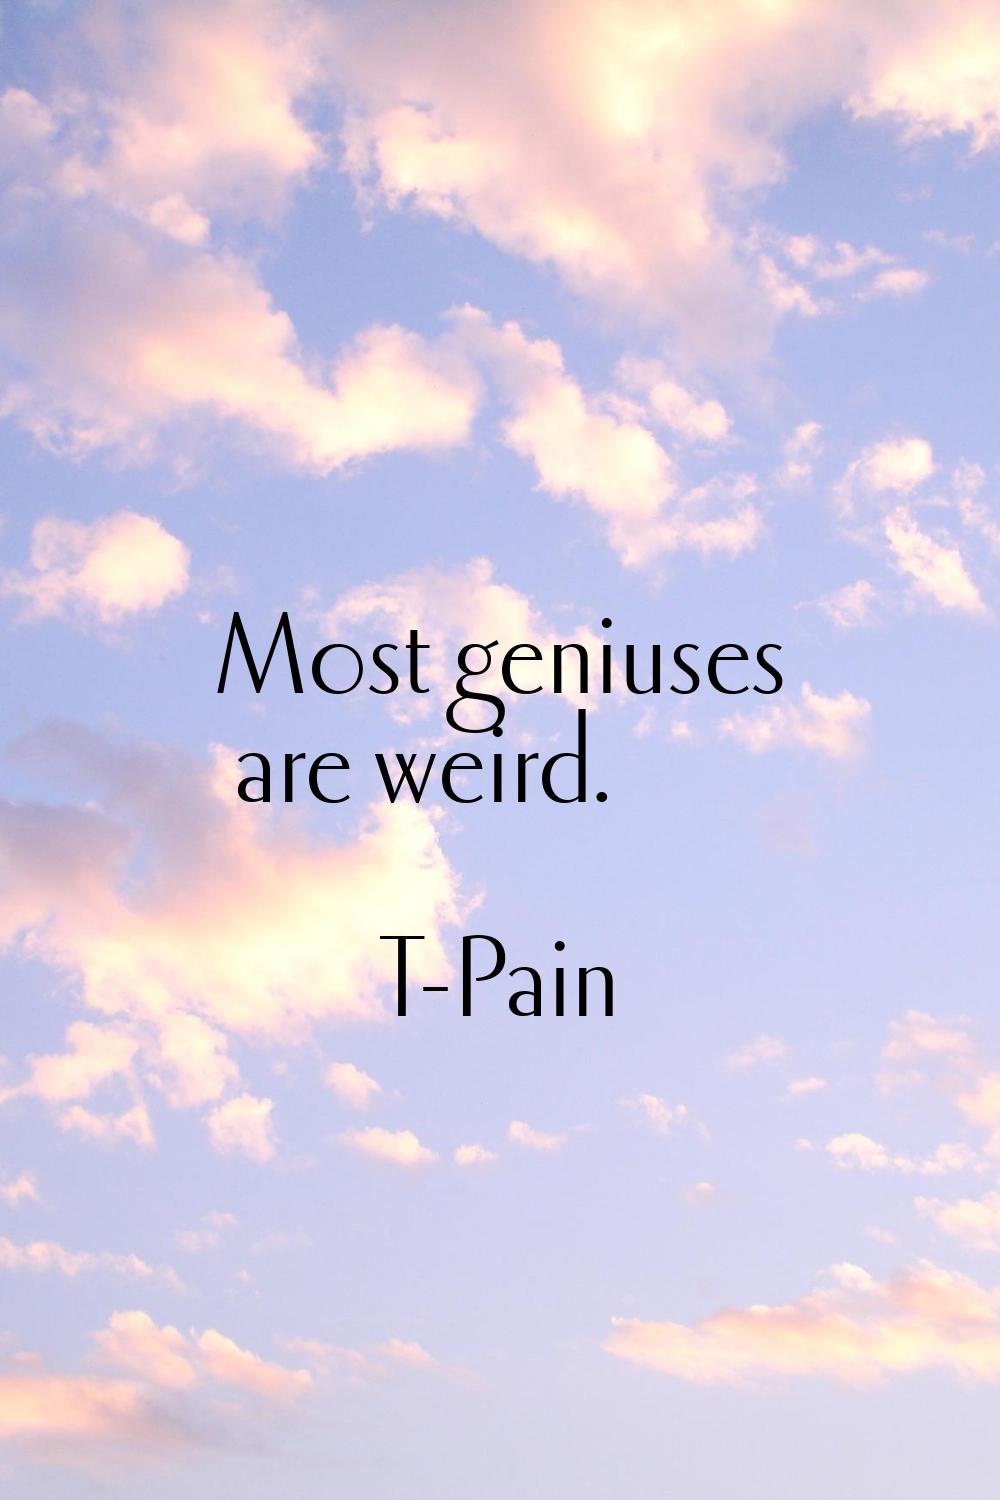 Most geniuses are weird.